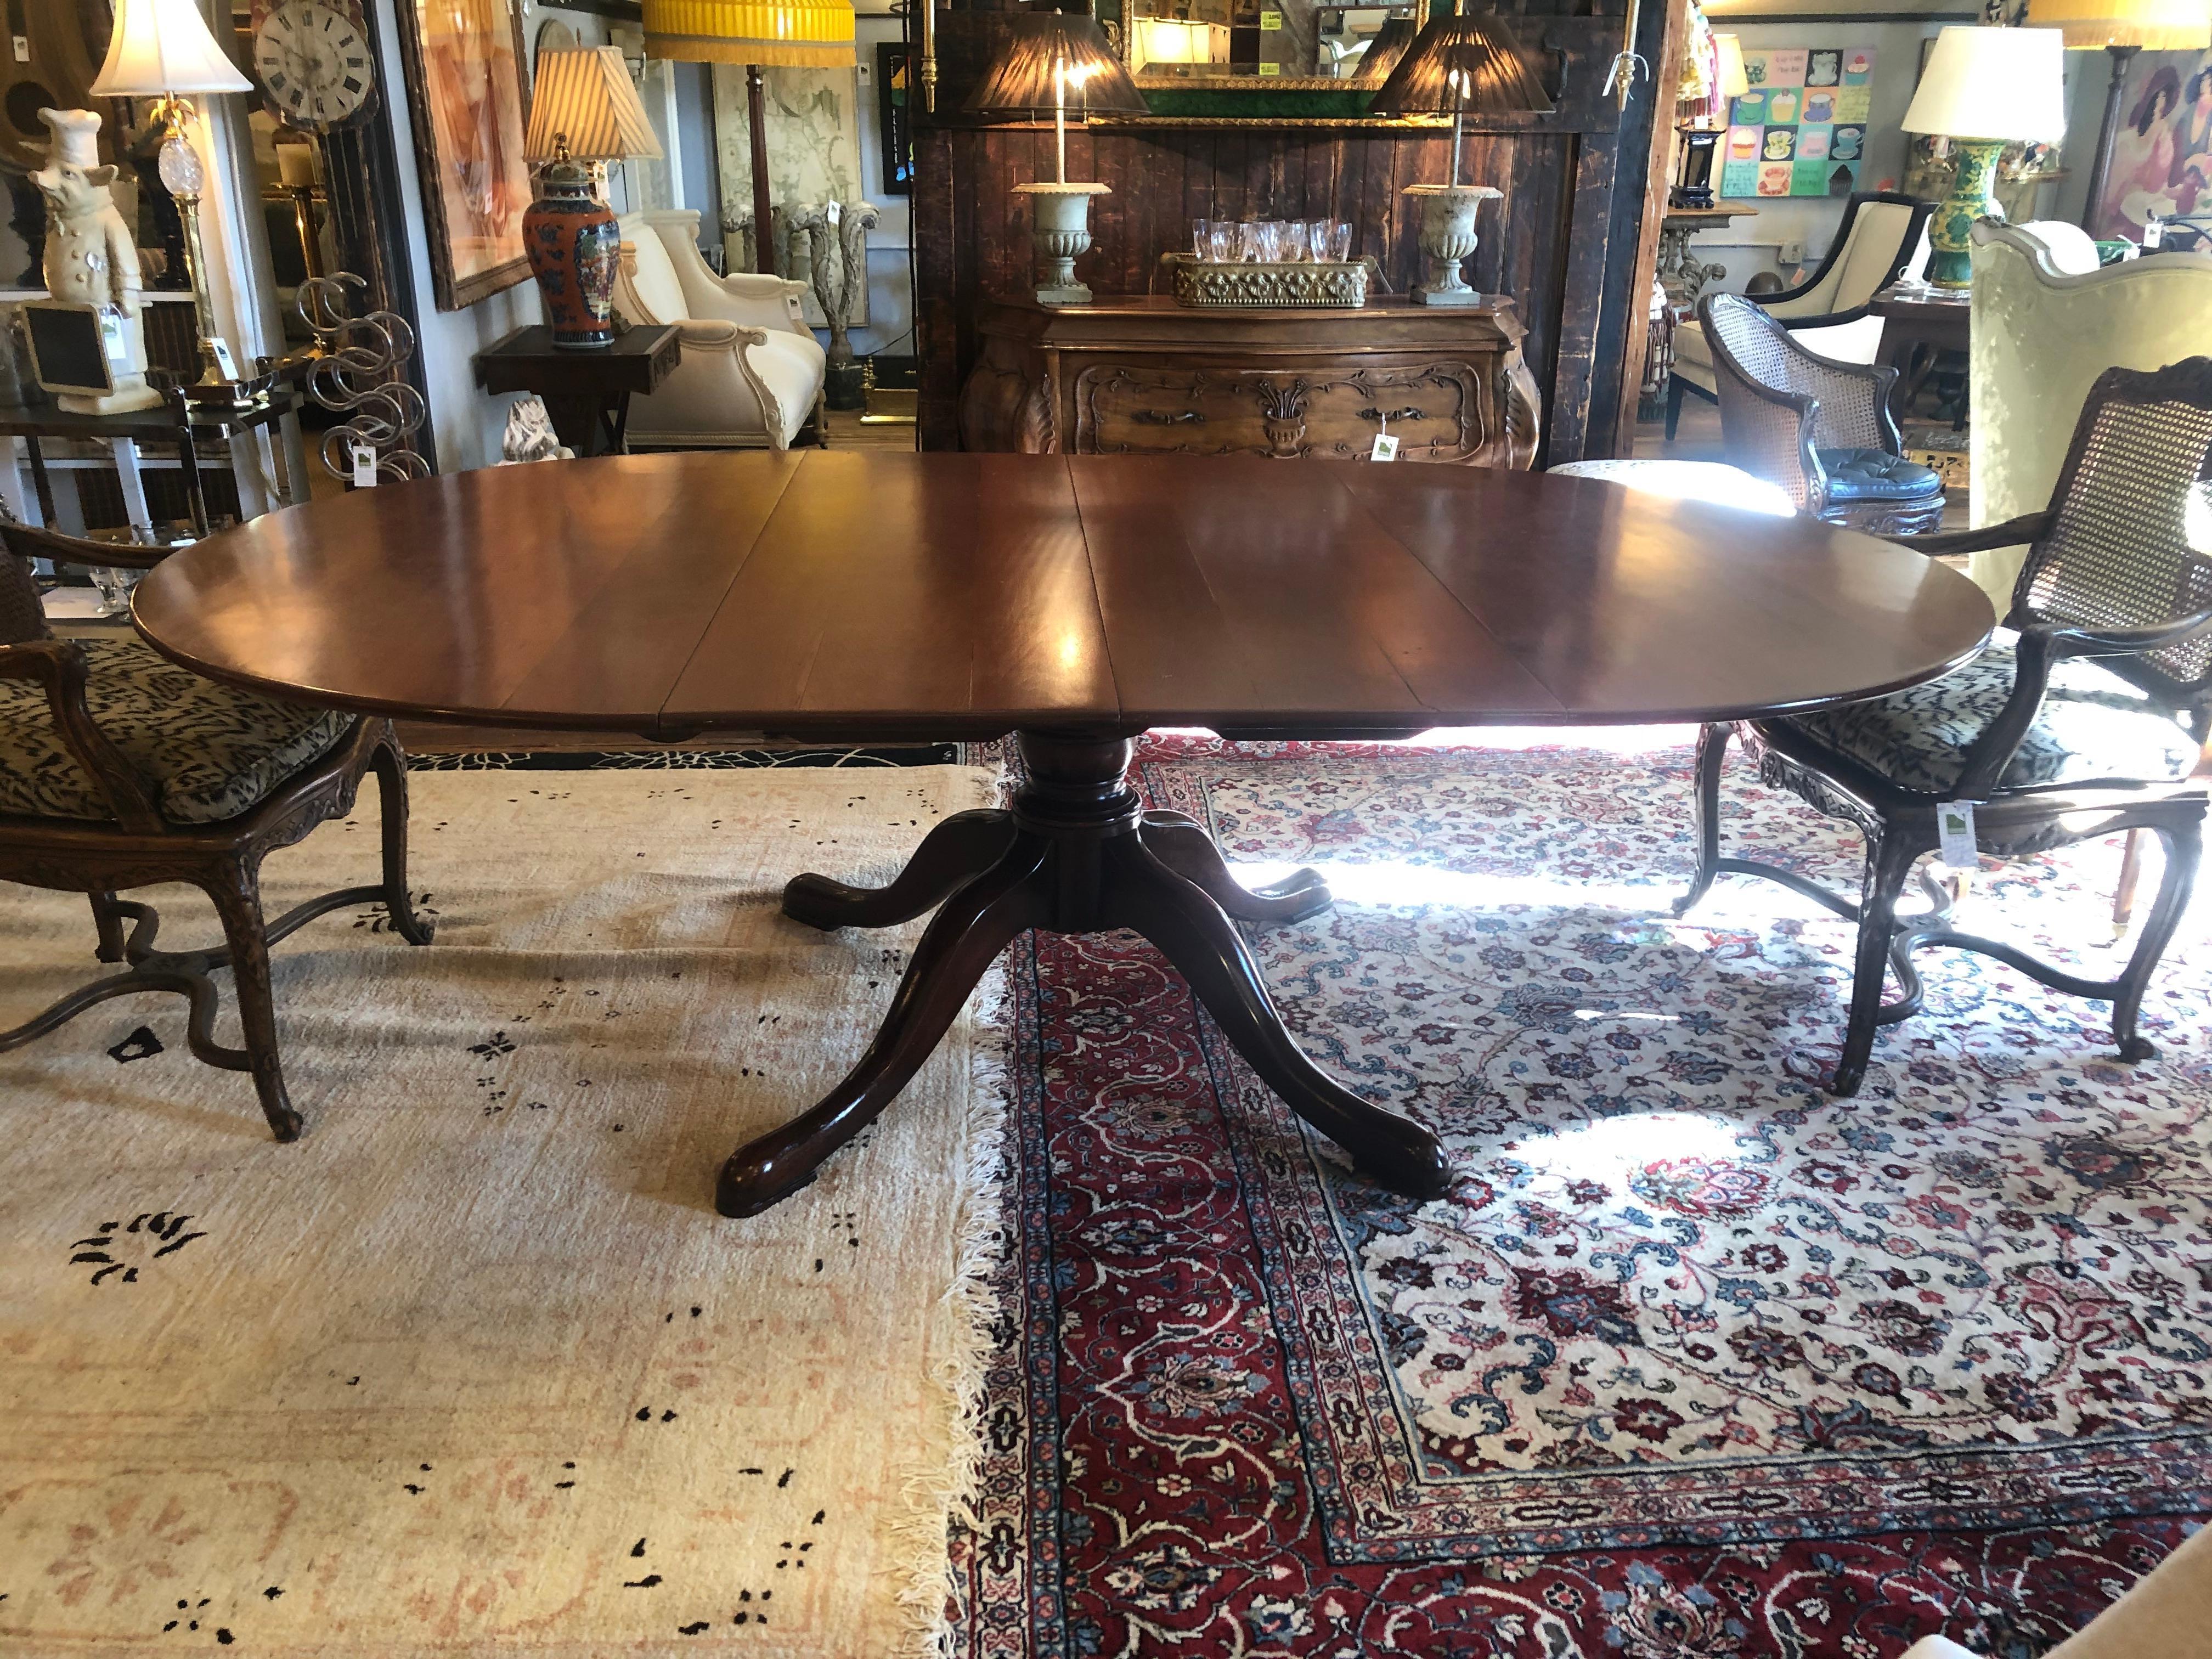 Classic Traditional Round Cherry Dining Table Extending to Large Oval 5